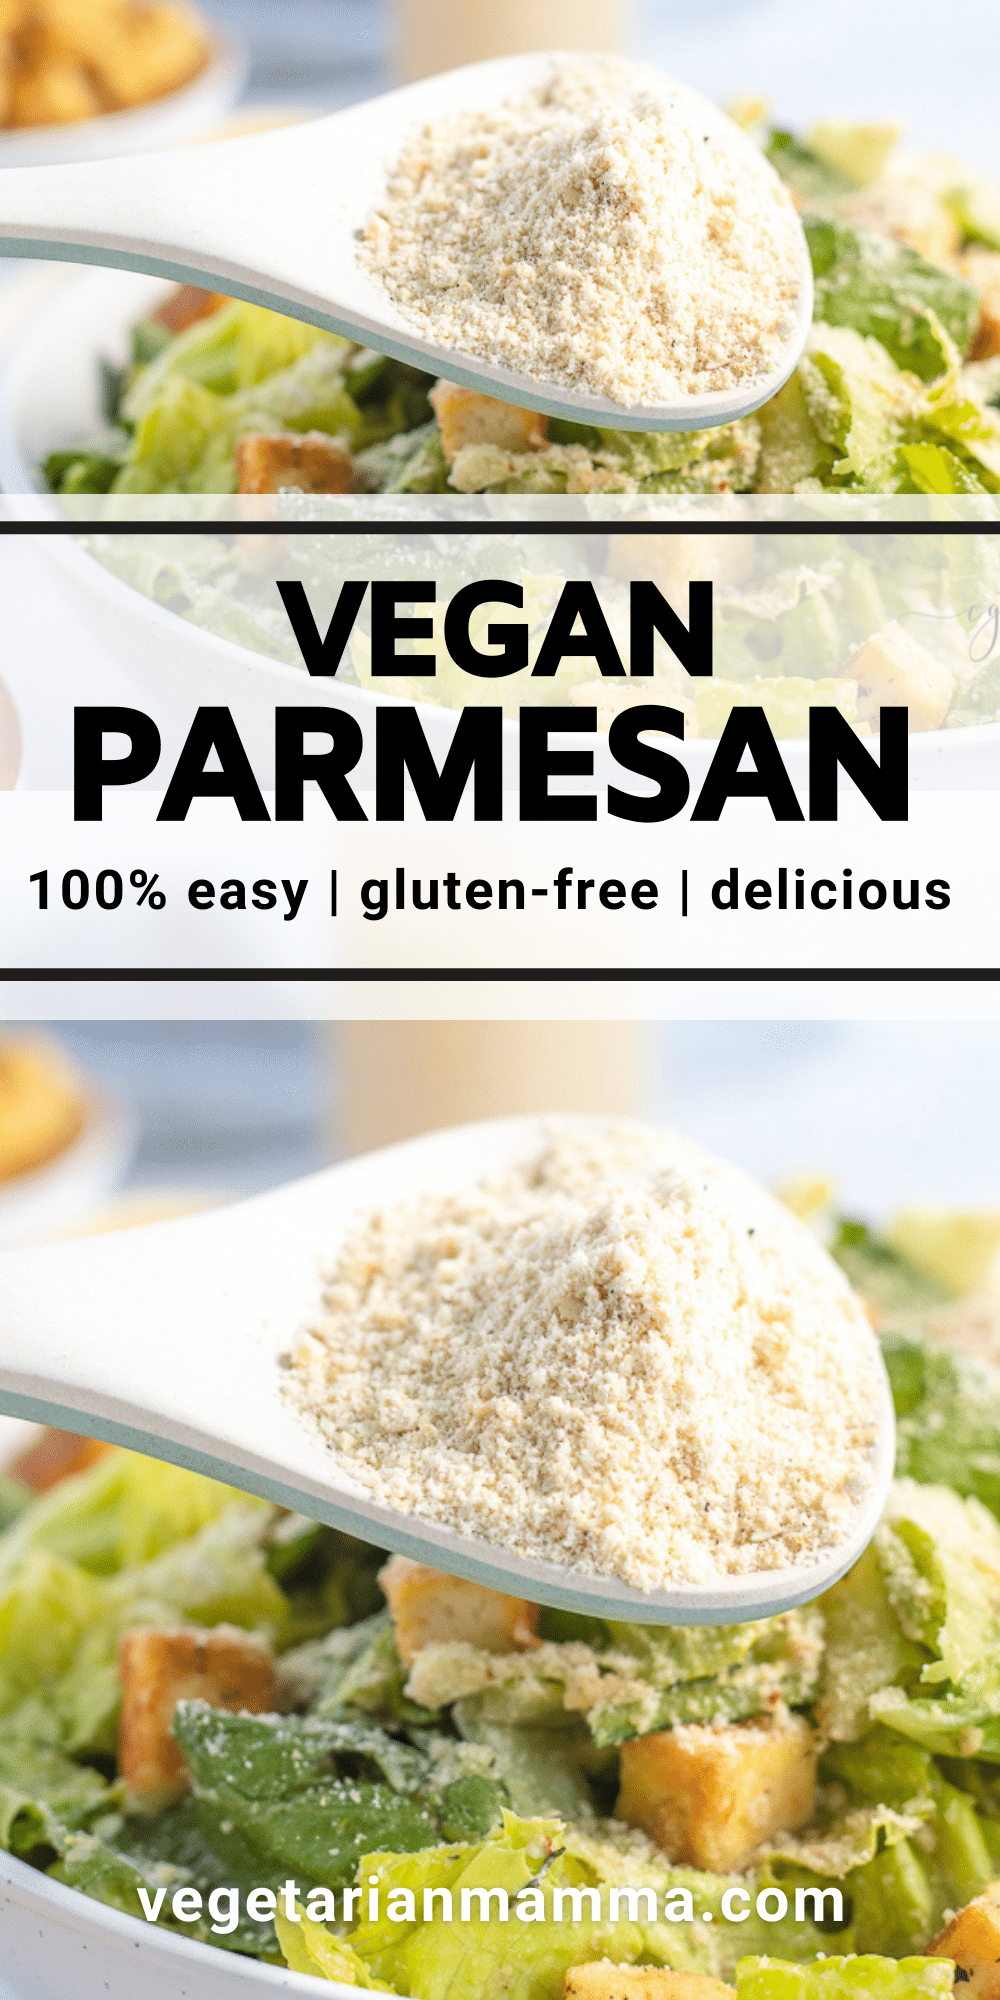 Add this Vegan Parmesan to all your salads, soups, and pasta dinners! The crumbly grated texture of cashews and nutritional yeast is just like the real thing without all the dairy.